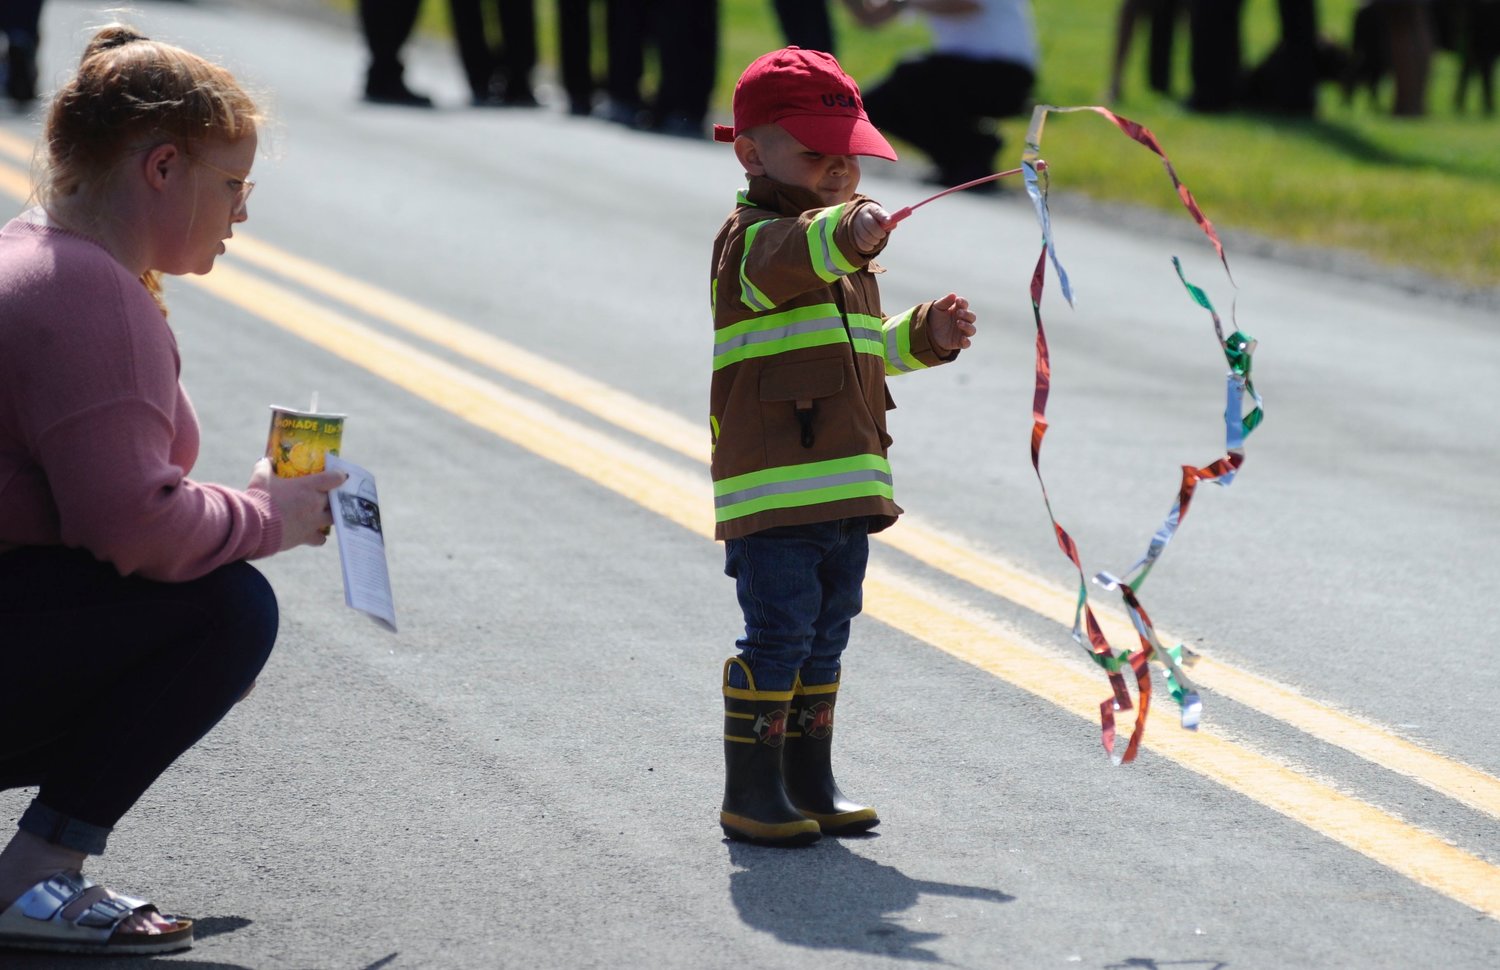 The littlest firefighter. After the parade, it was time to bring out the steamers.